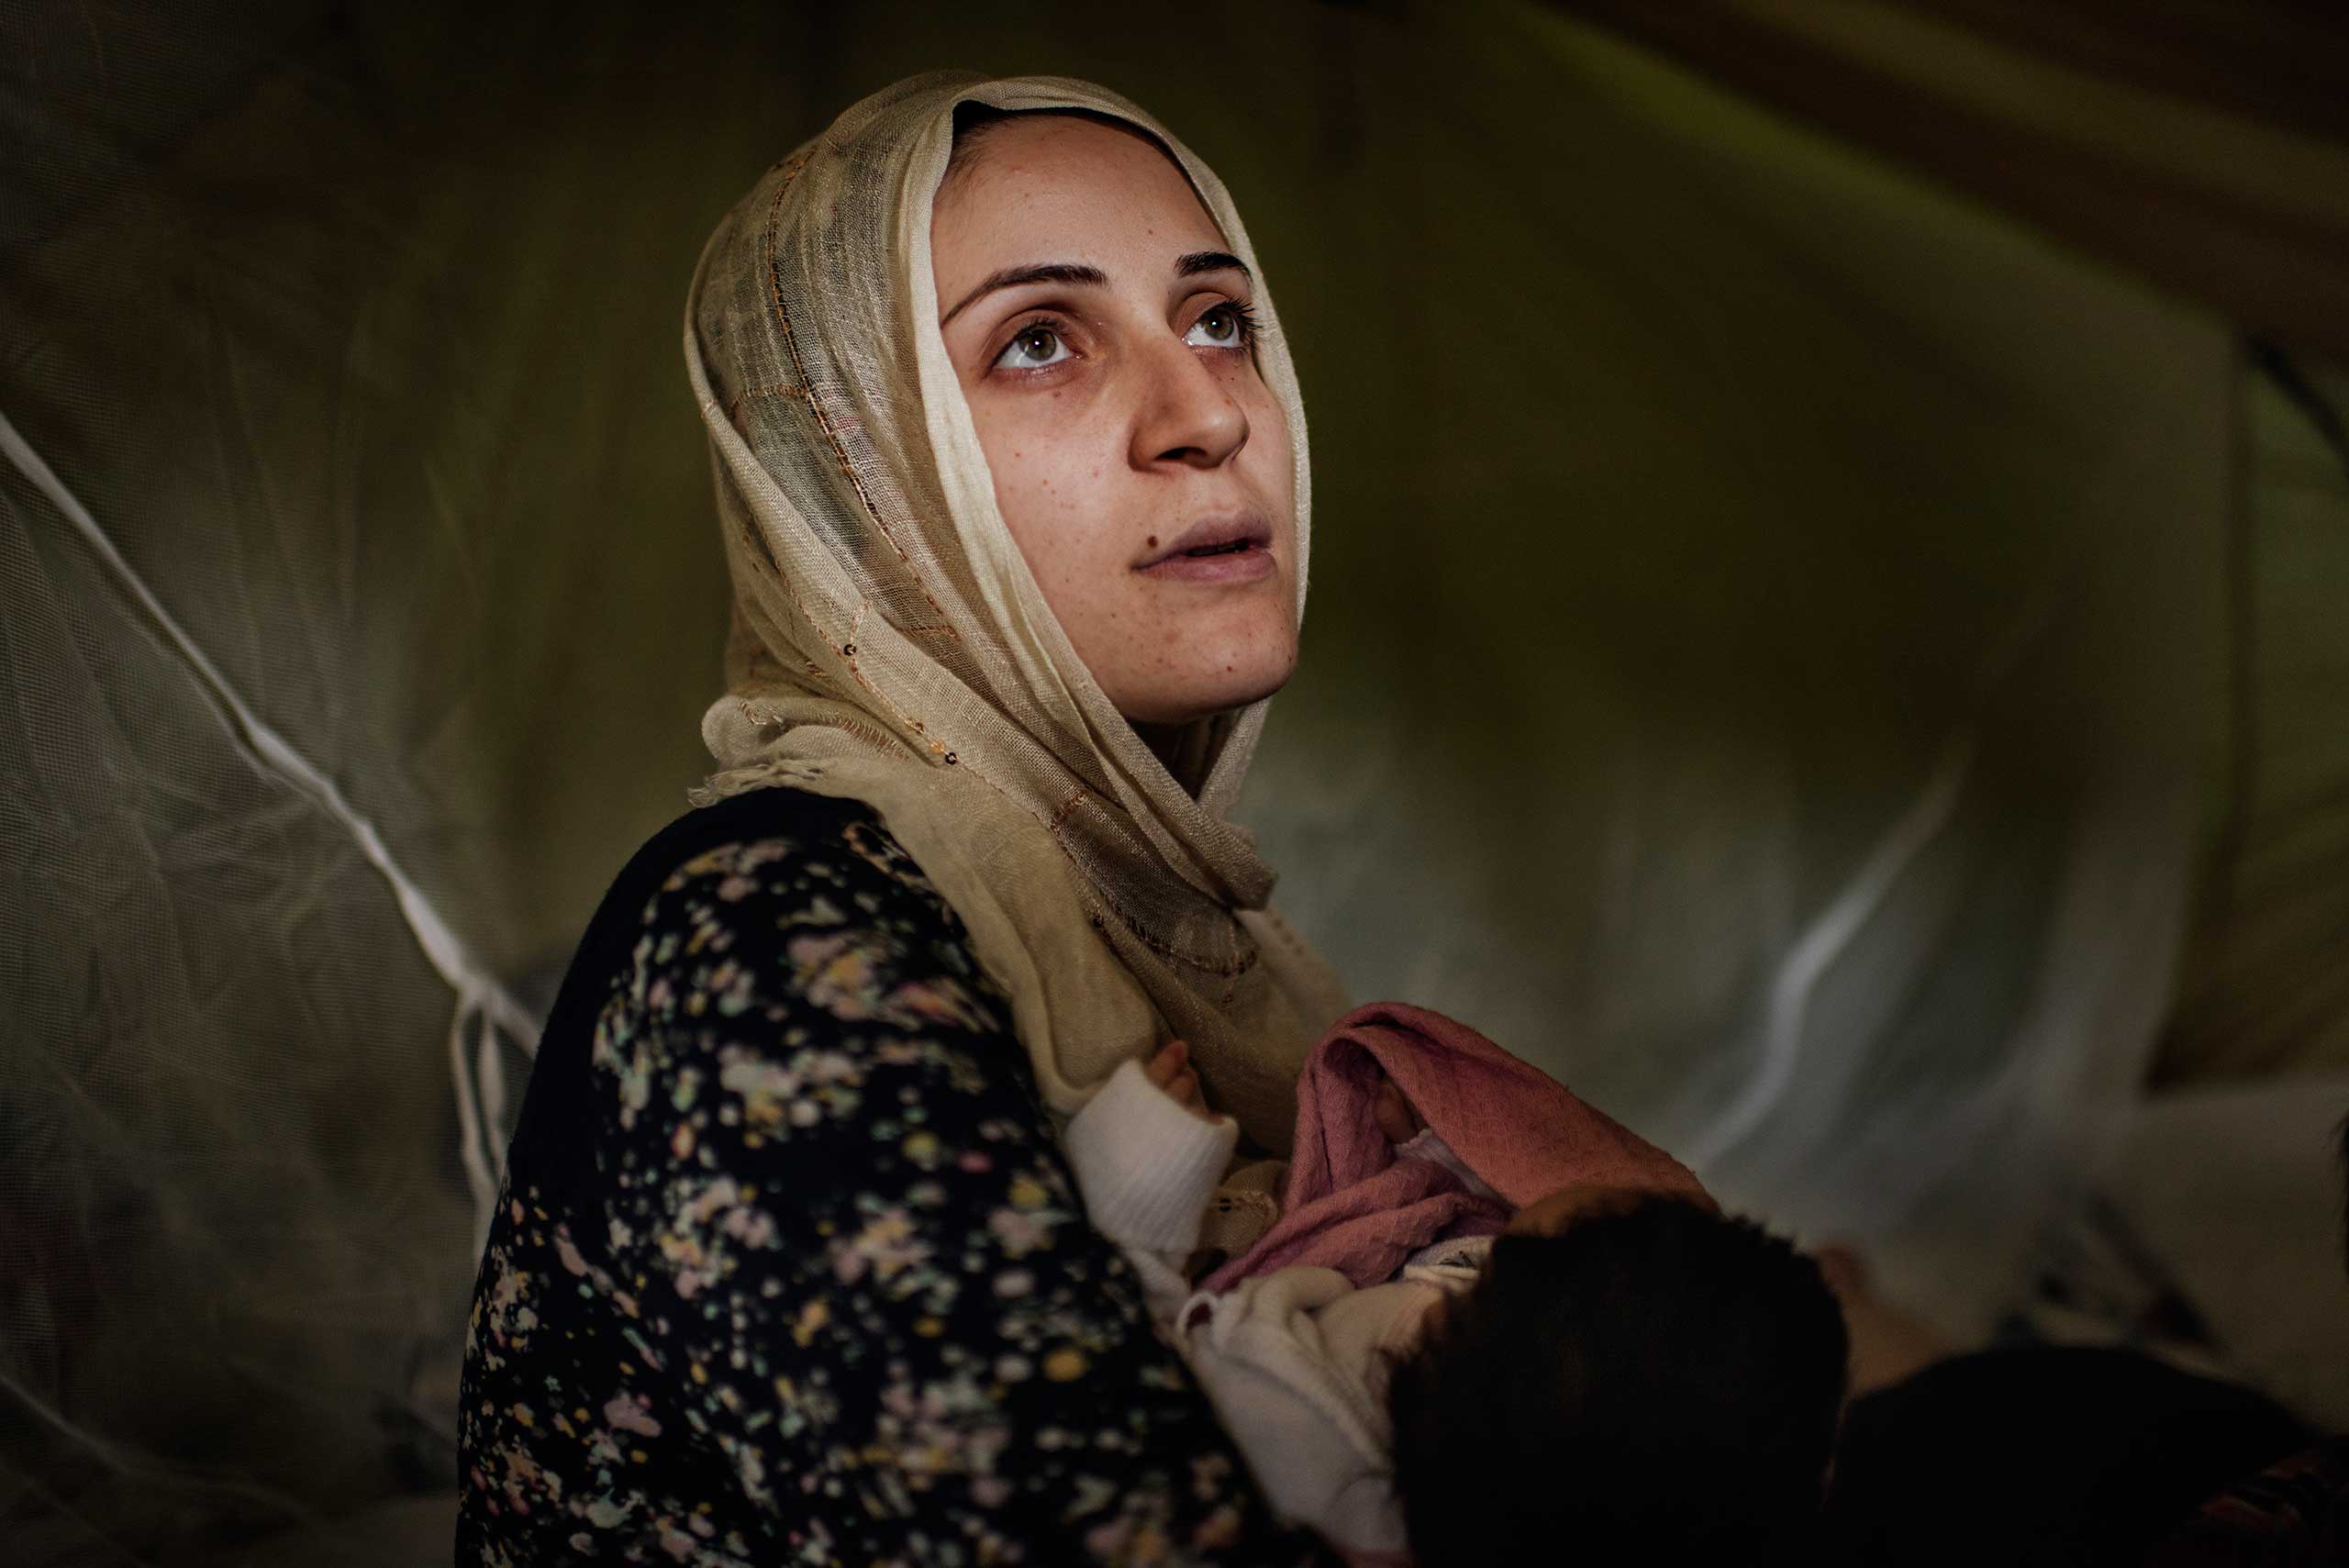 Taimaa Abazli, 24, holds her new baby Heln in their tent at the Karamalis camp in Thessaloniki, Greece, September 2016.